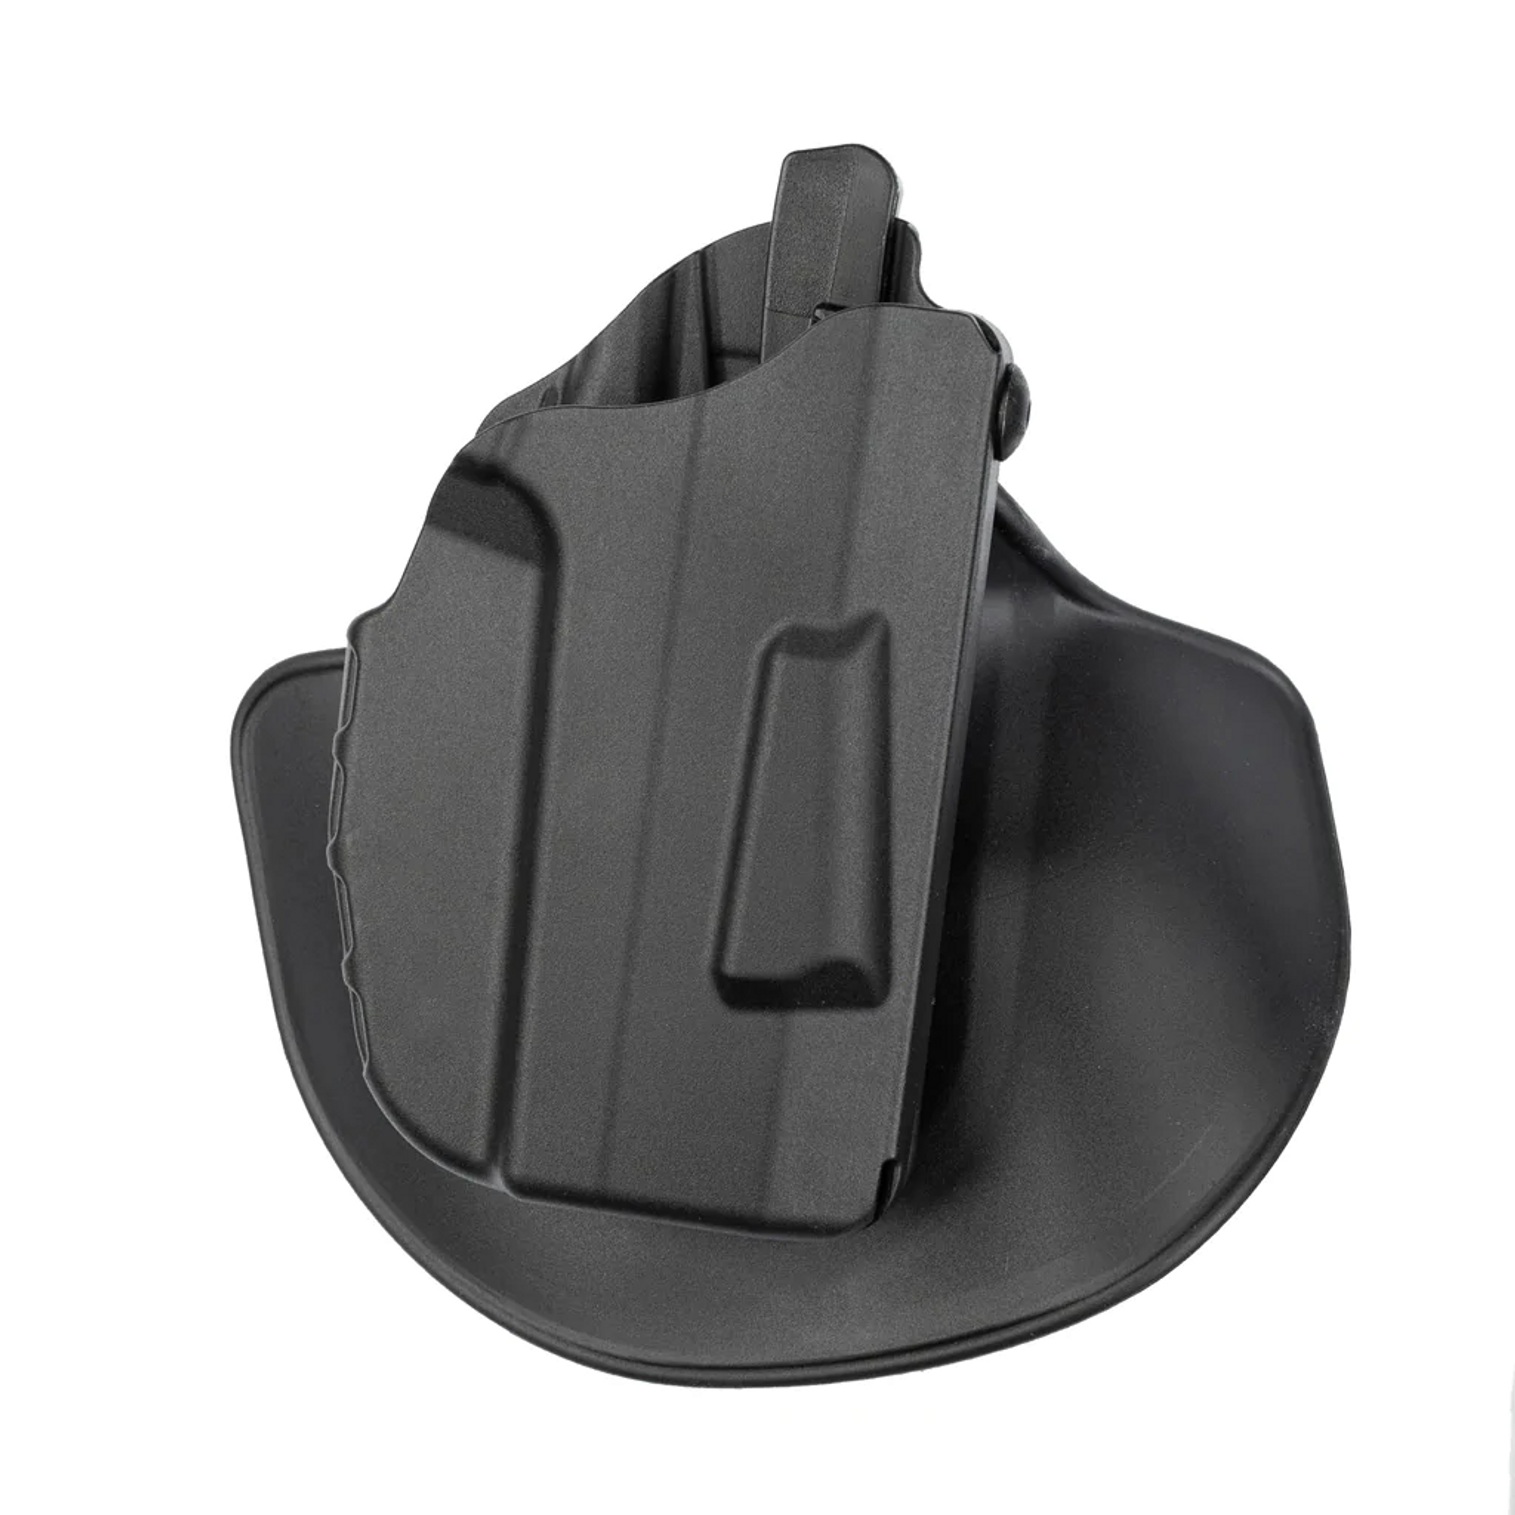 Model 7378 7ts Als Concealment Paddle And Belt Loop Combo Holster For Glock 17 W/ Light